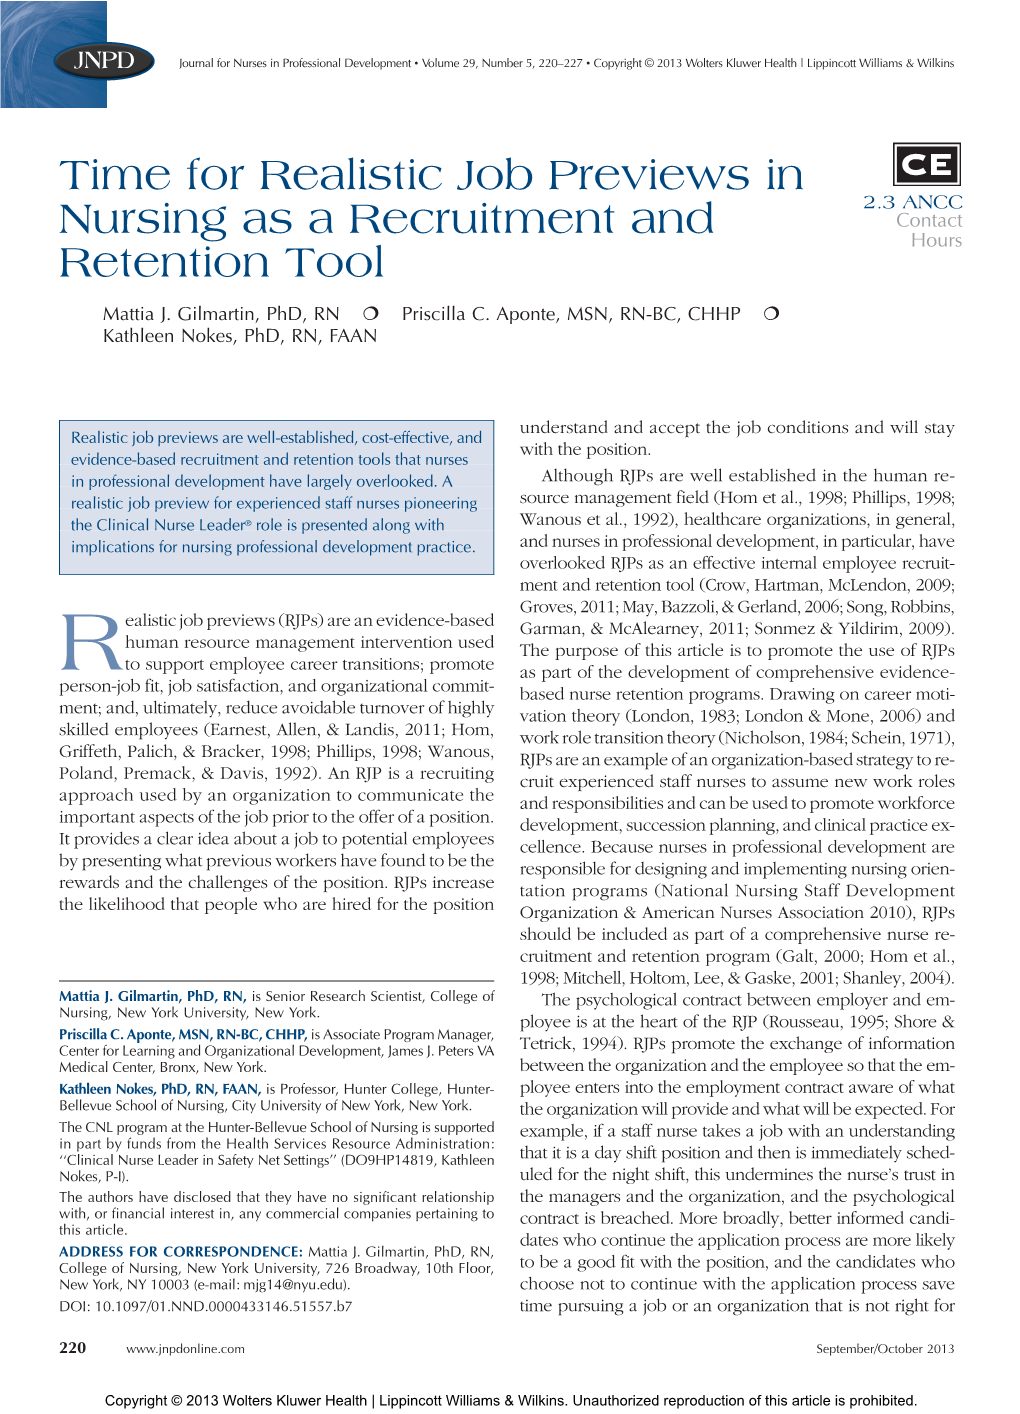 Time for Realistic Job Previews in Nursing As a Recruitment